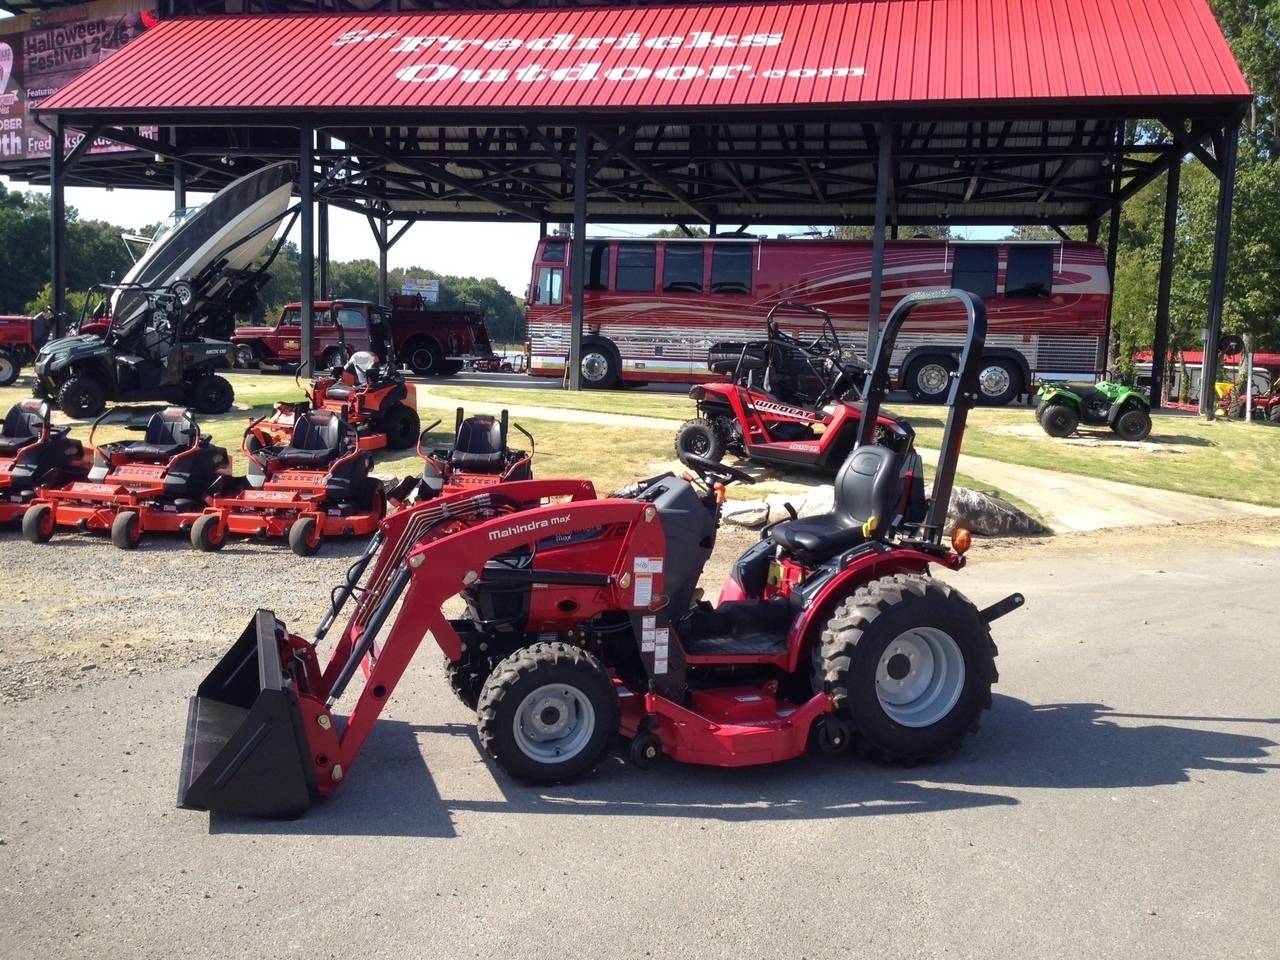 Mahindra Max 26 Shuttle (25.6hp) Loader Belly Mower, Decatur AL ...